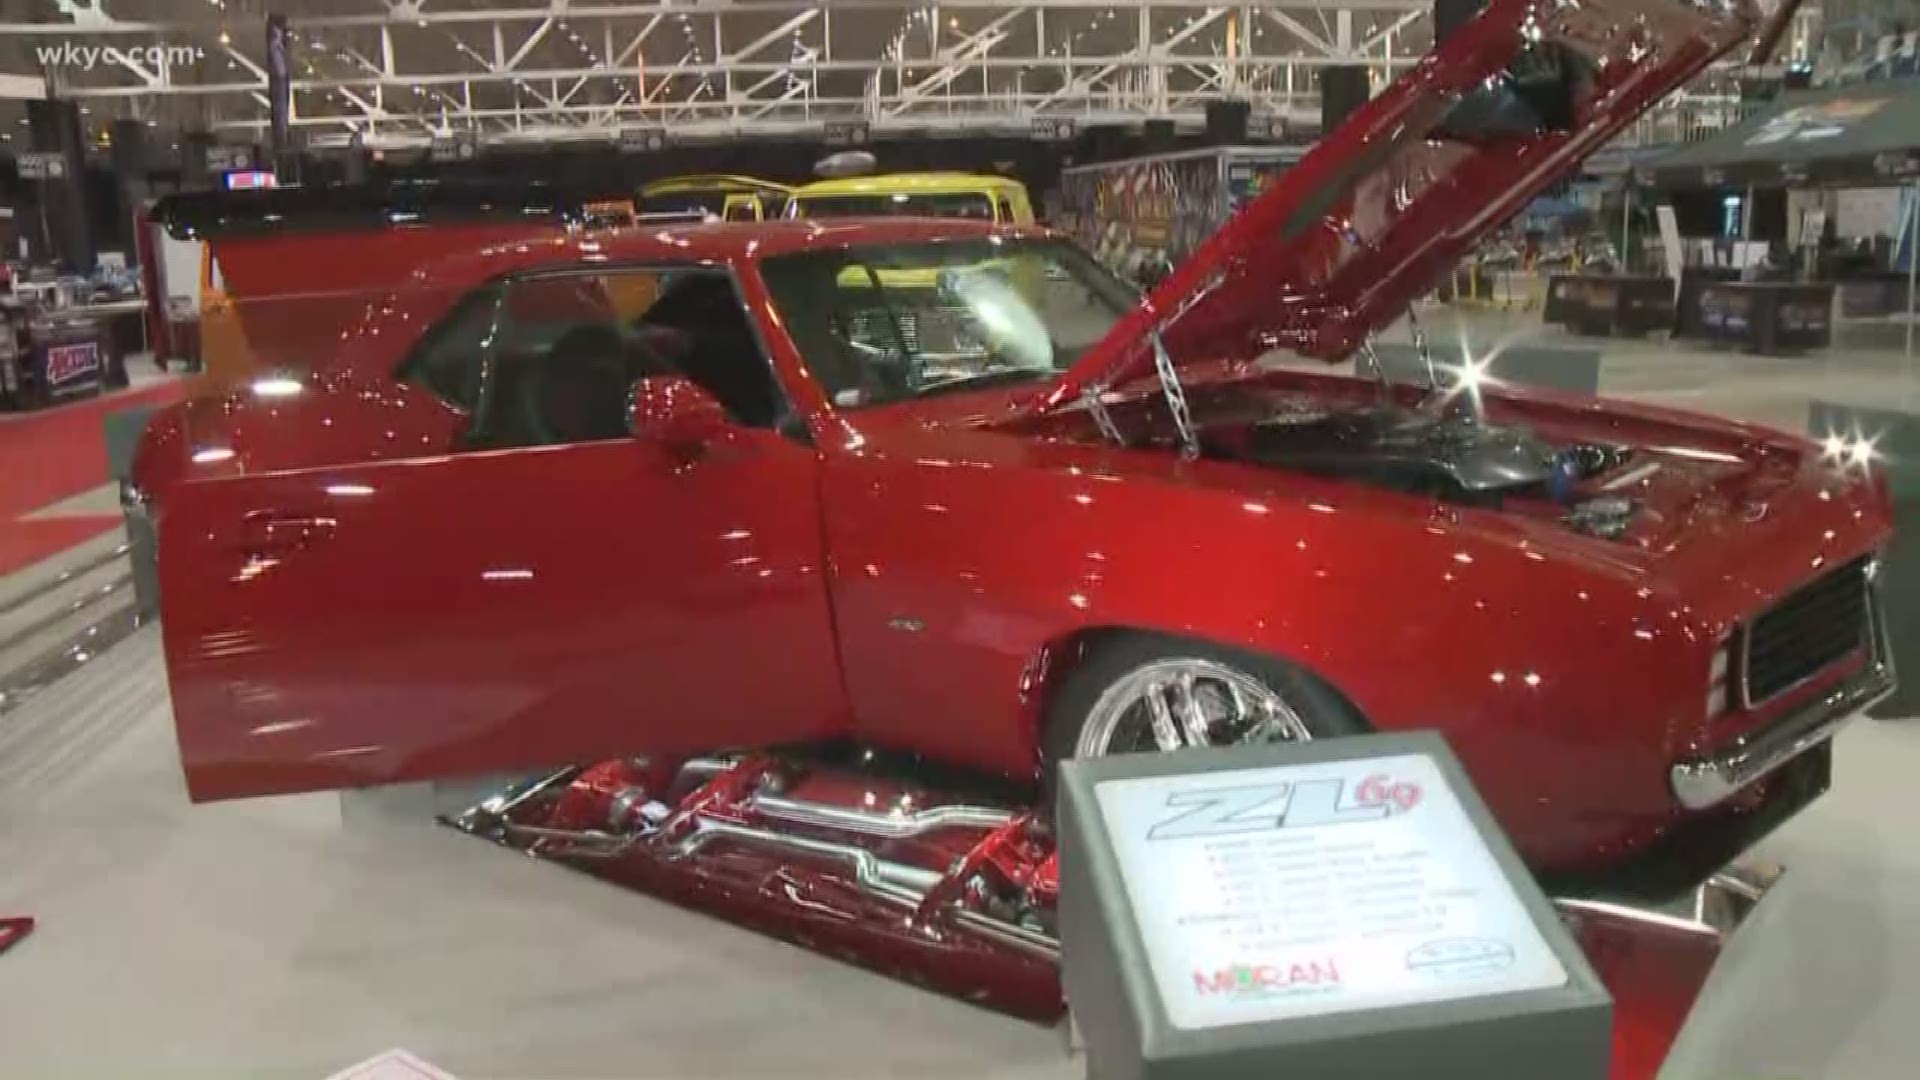 Lindsay talks to Claire Anter about the Piston Power Auto-Rama at the I-X Center.